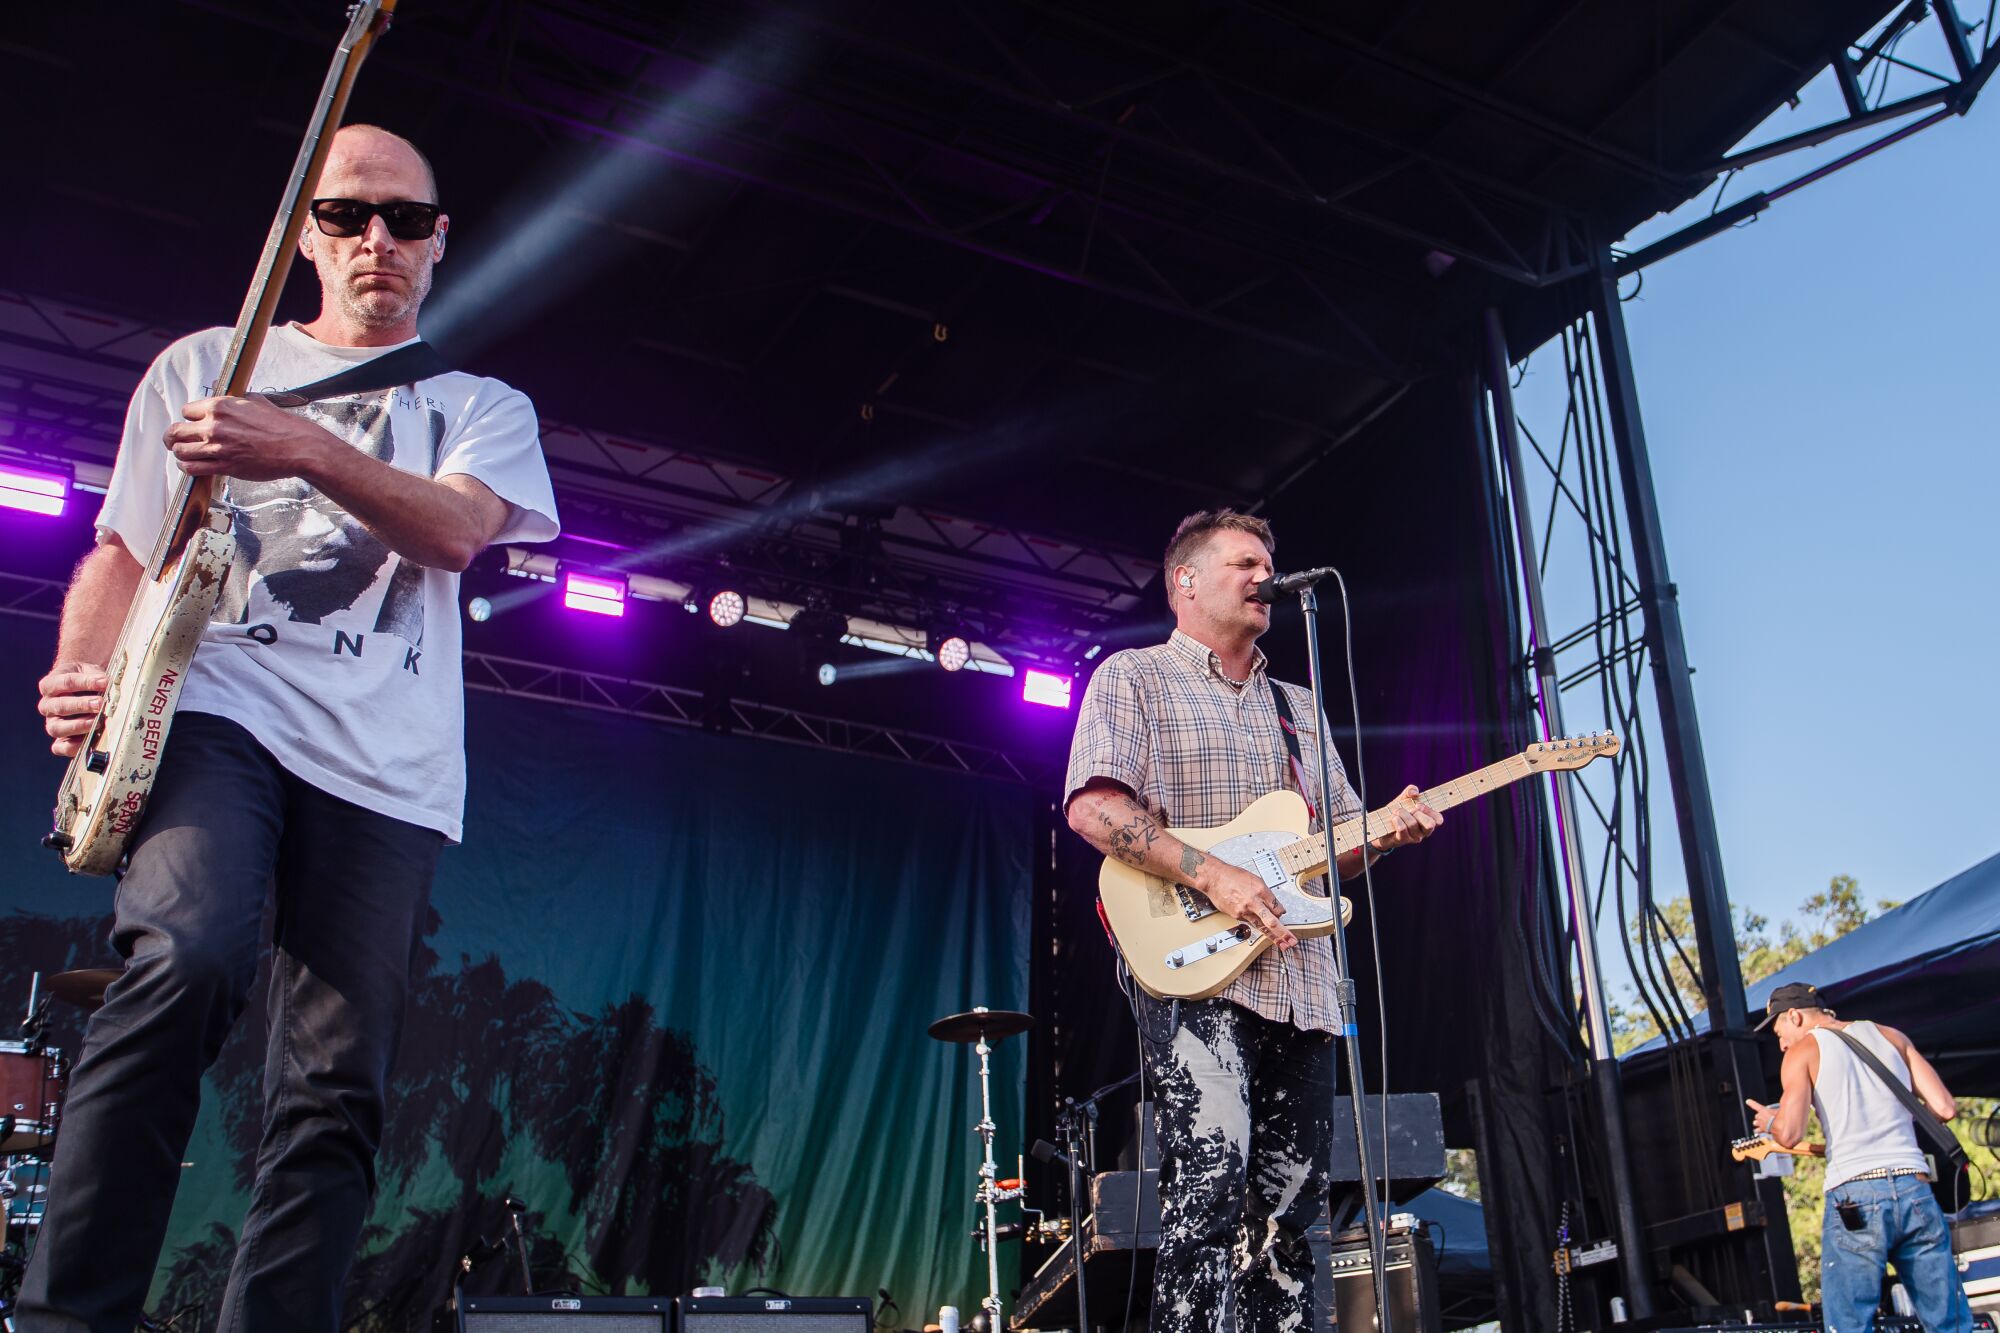 Cold War Kids performs at the Ohana Festival on September 25, 2021 in Dana Point, California.